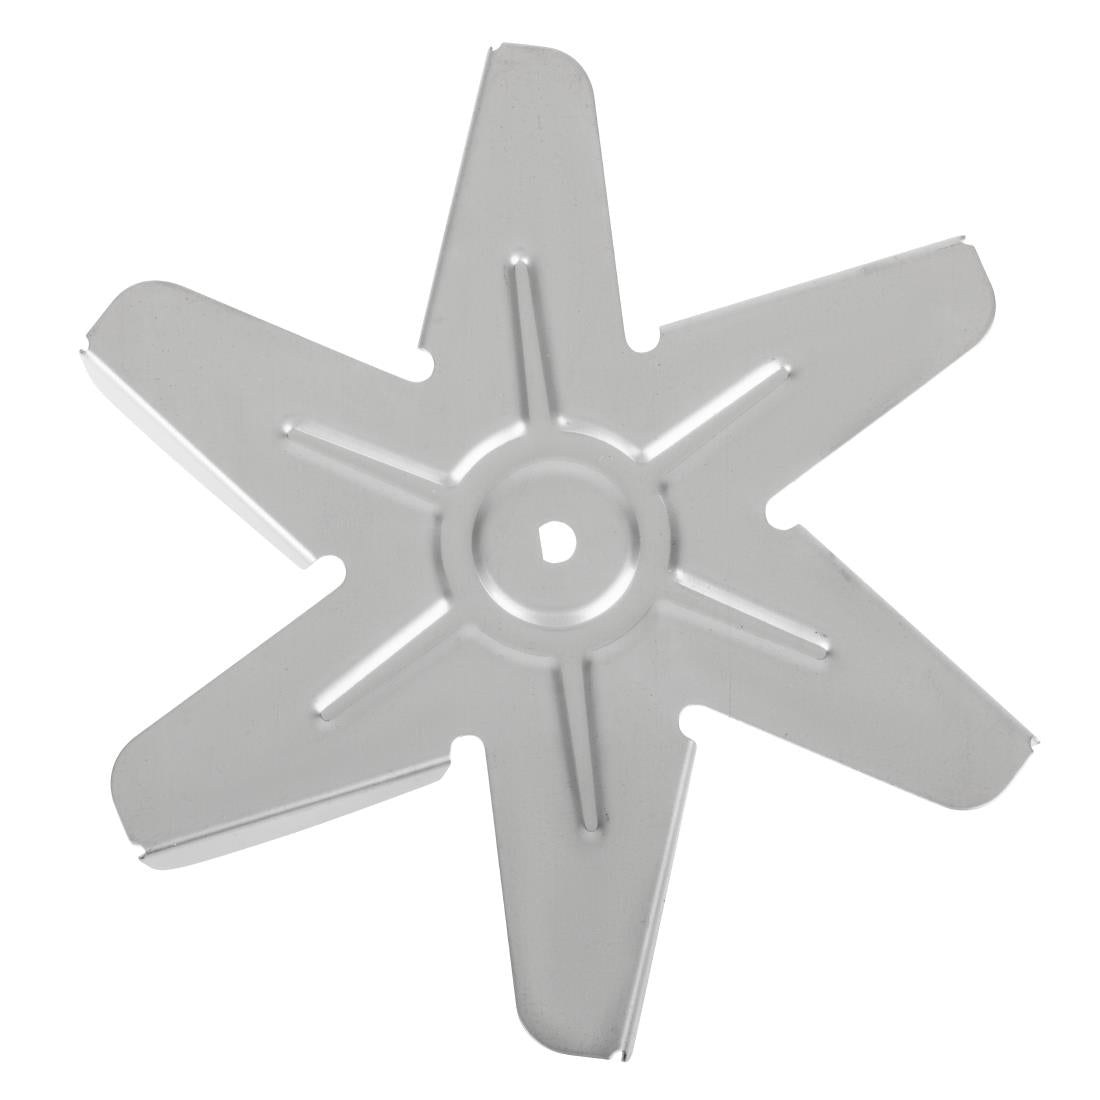 AT020 Buffalo 600 Series Stainless Steel Fan Blade